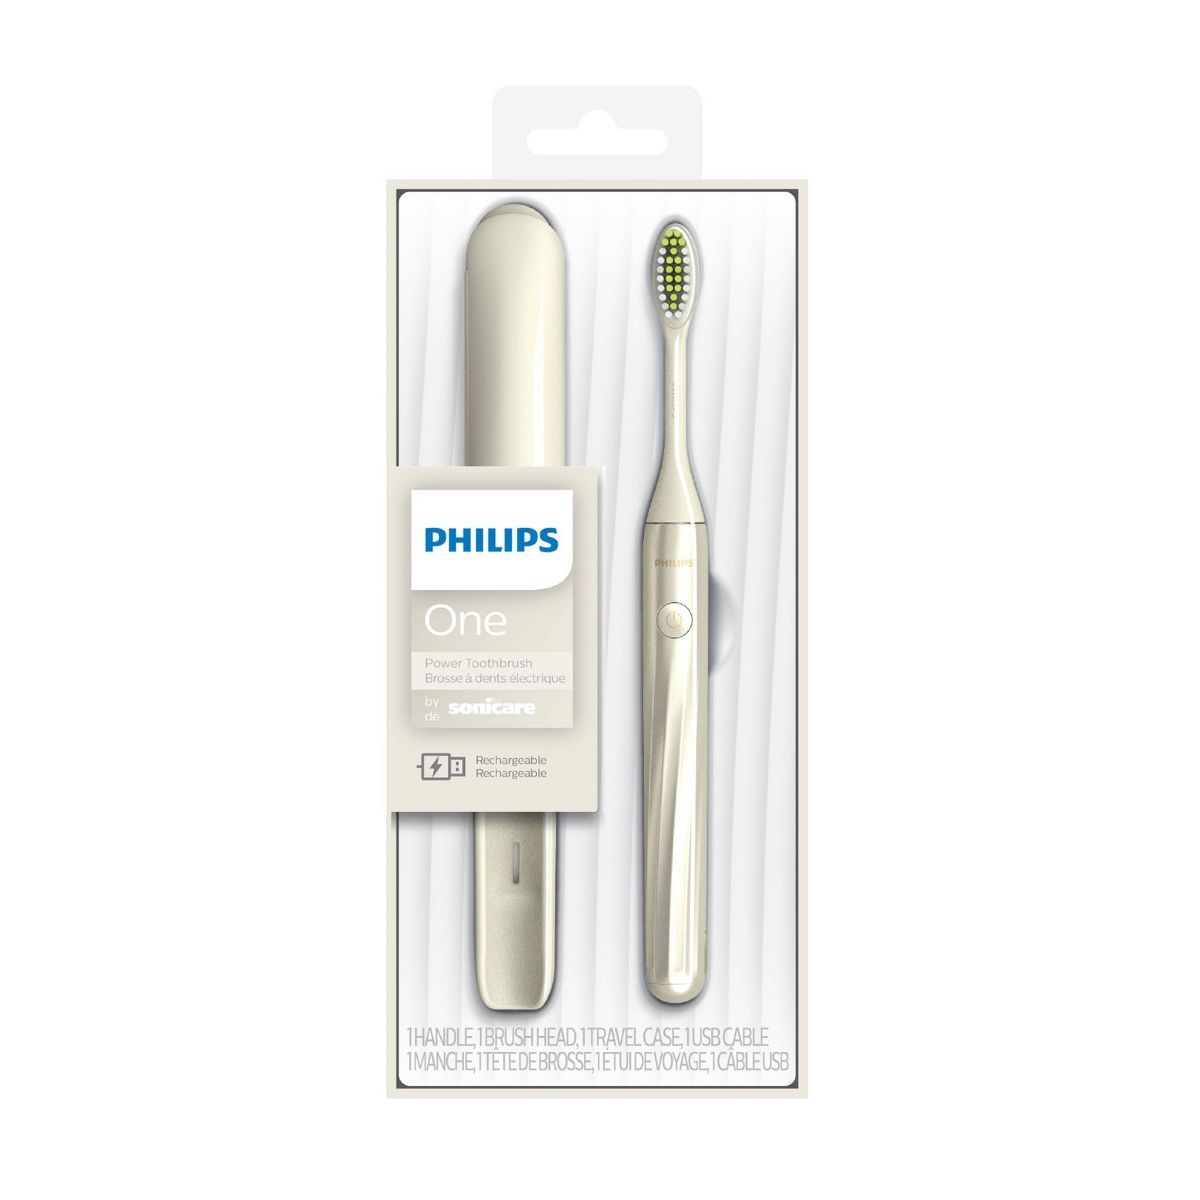 Philips One by Sonicare Rechargeable Electric Toothbrush | Target